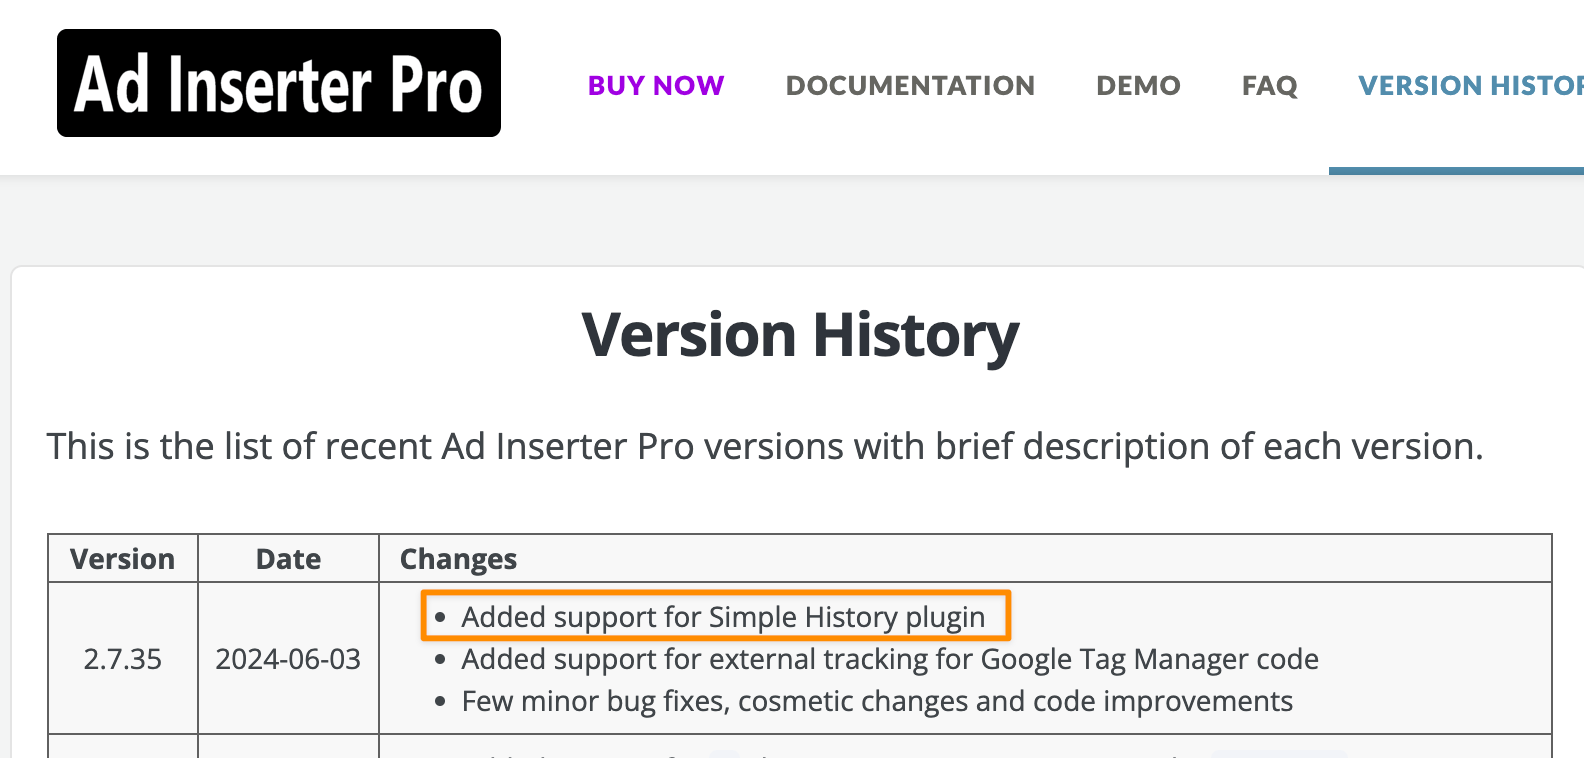 Ad management plugin “Ad Inserter” adds support for Simple History